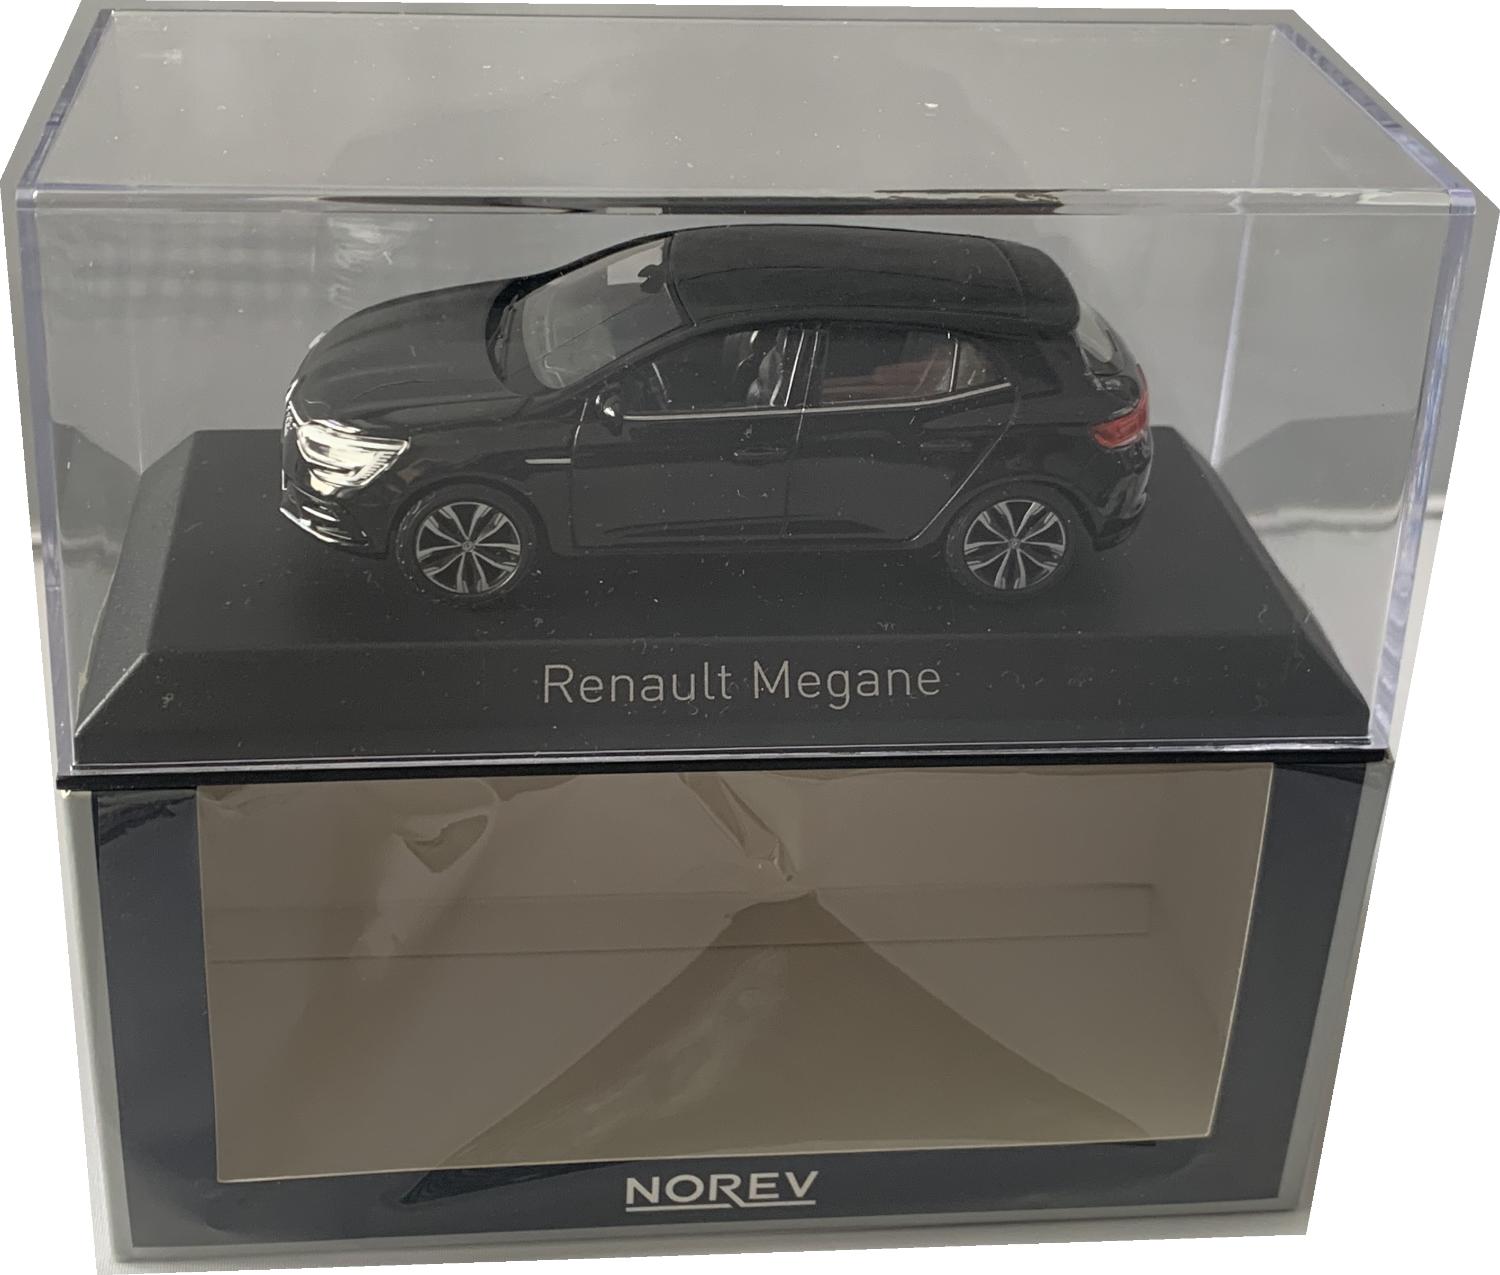 An excellent reproduction of the Renault Megane with detail throughout, all authentically recreated.  Model is mounted on a removable plinth with a removable hard plastic cover